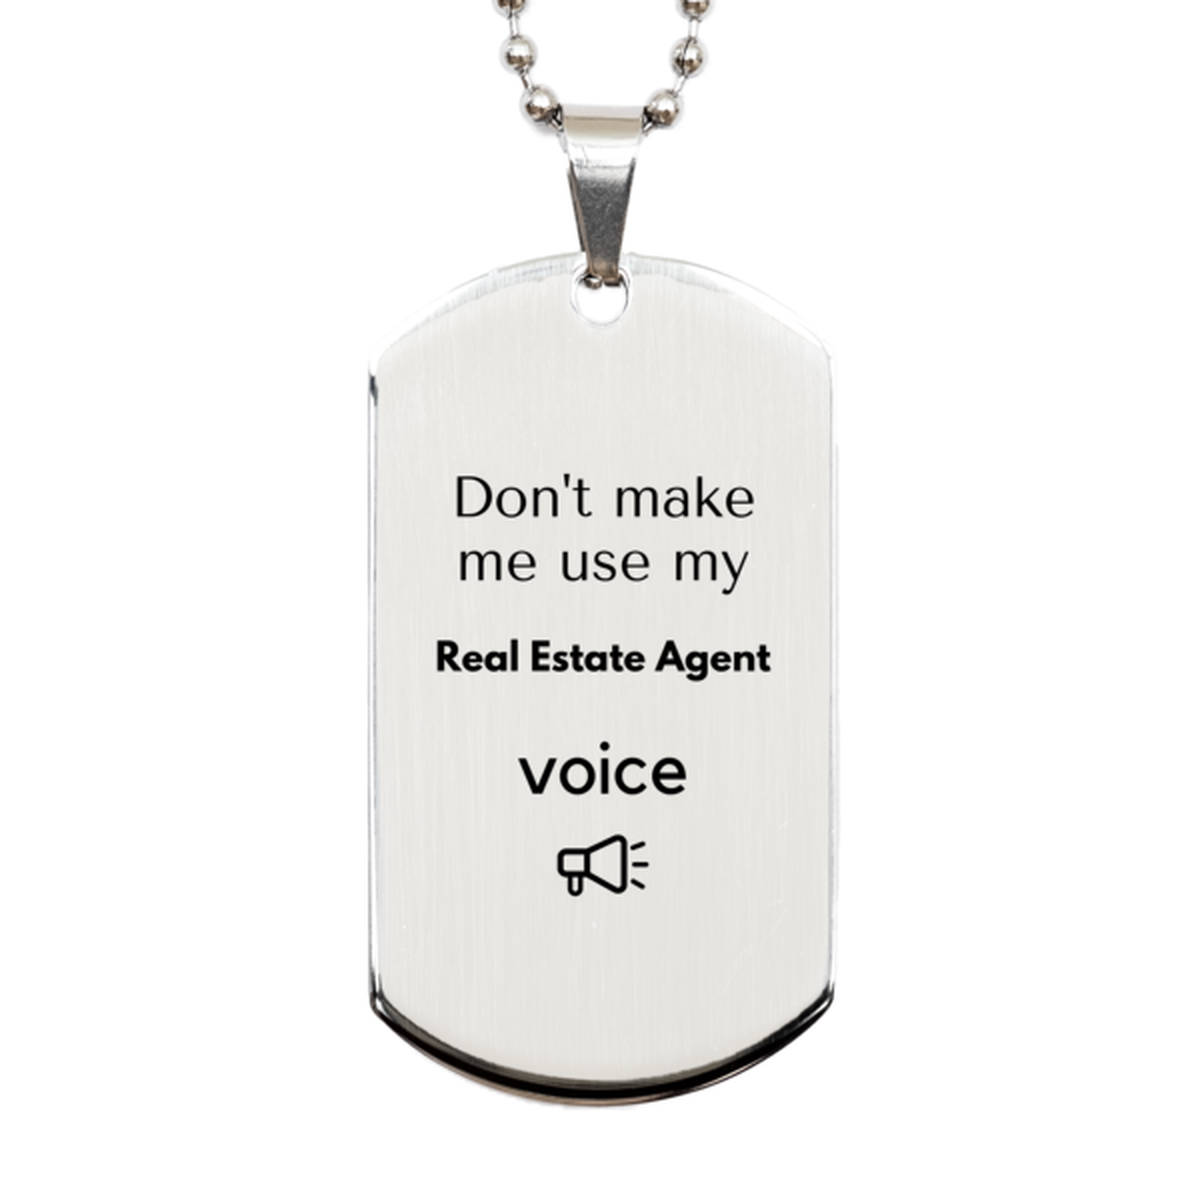 Don't make me use my Real Estate Agent voice, Sarcasm Real Estate Agent Gifts, Christmas Real Estate Agent Silver Dog Tag Birthday Unique Gifts For Real Estate Agent Coworkers, Men, Women, Colleague, Friends